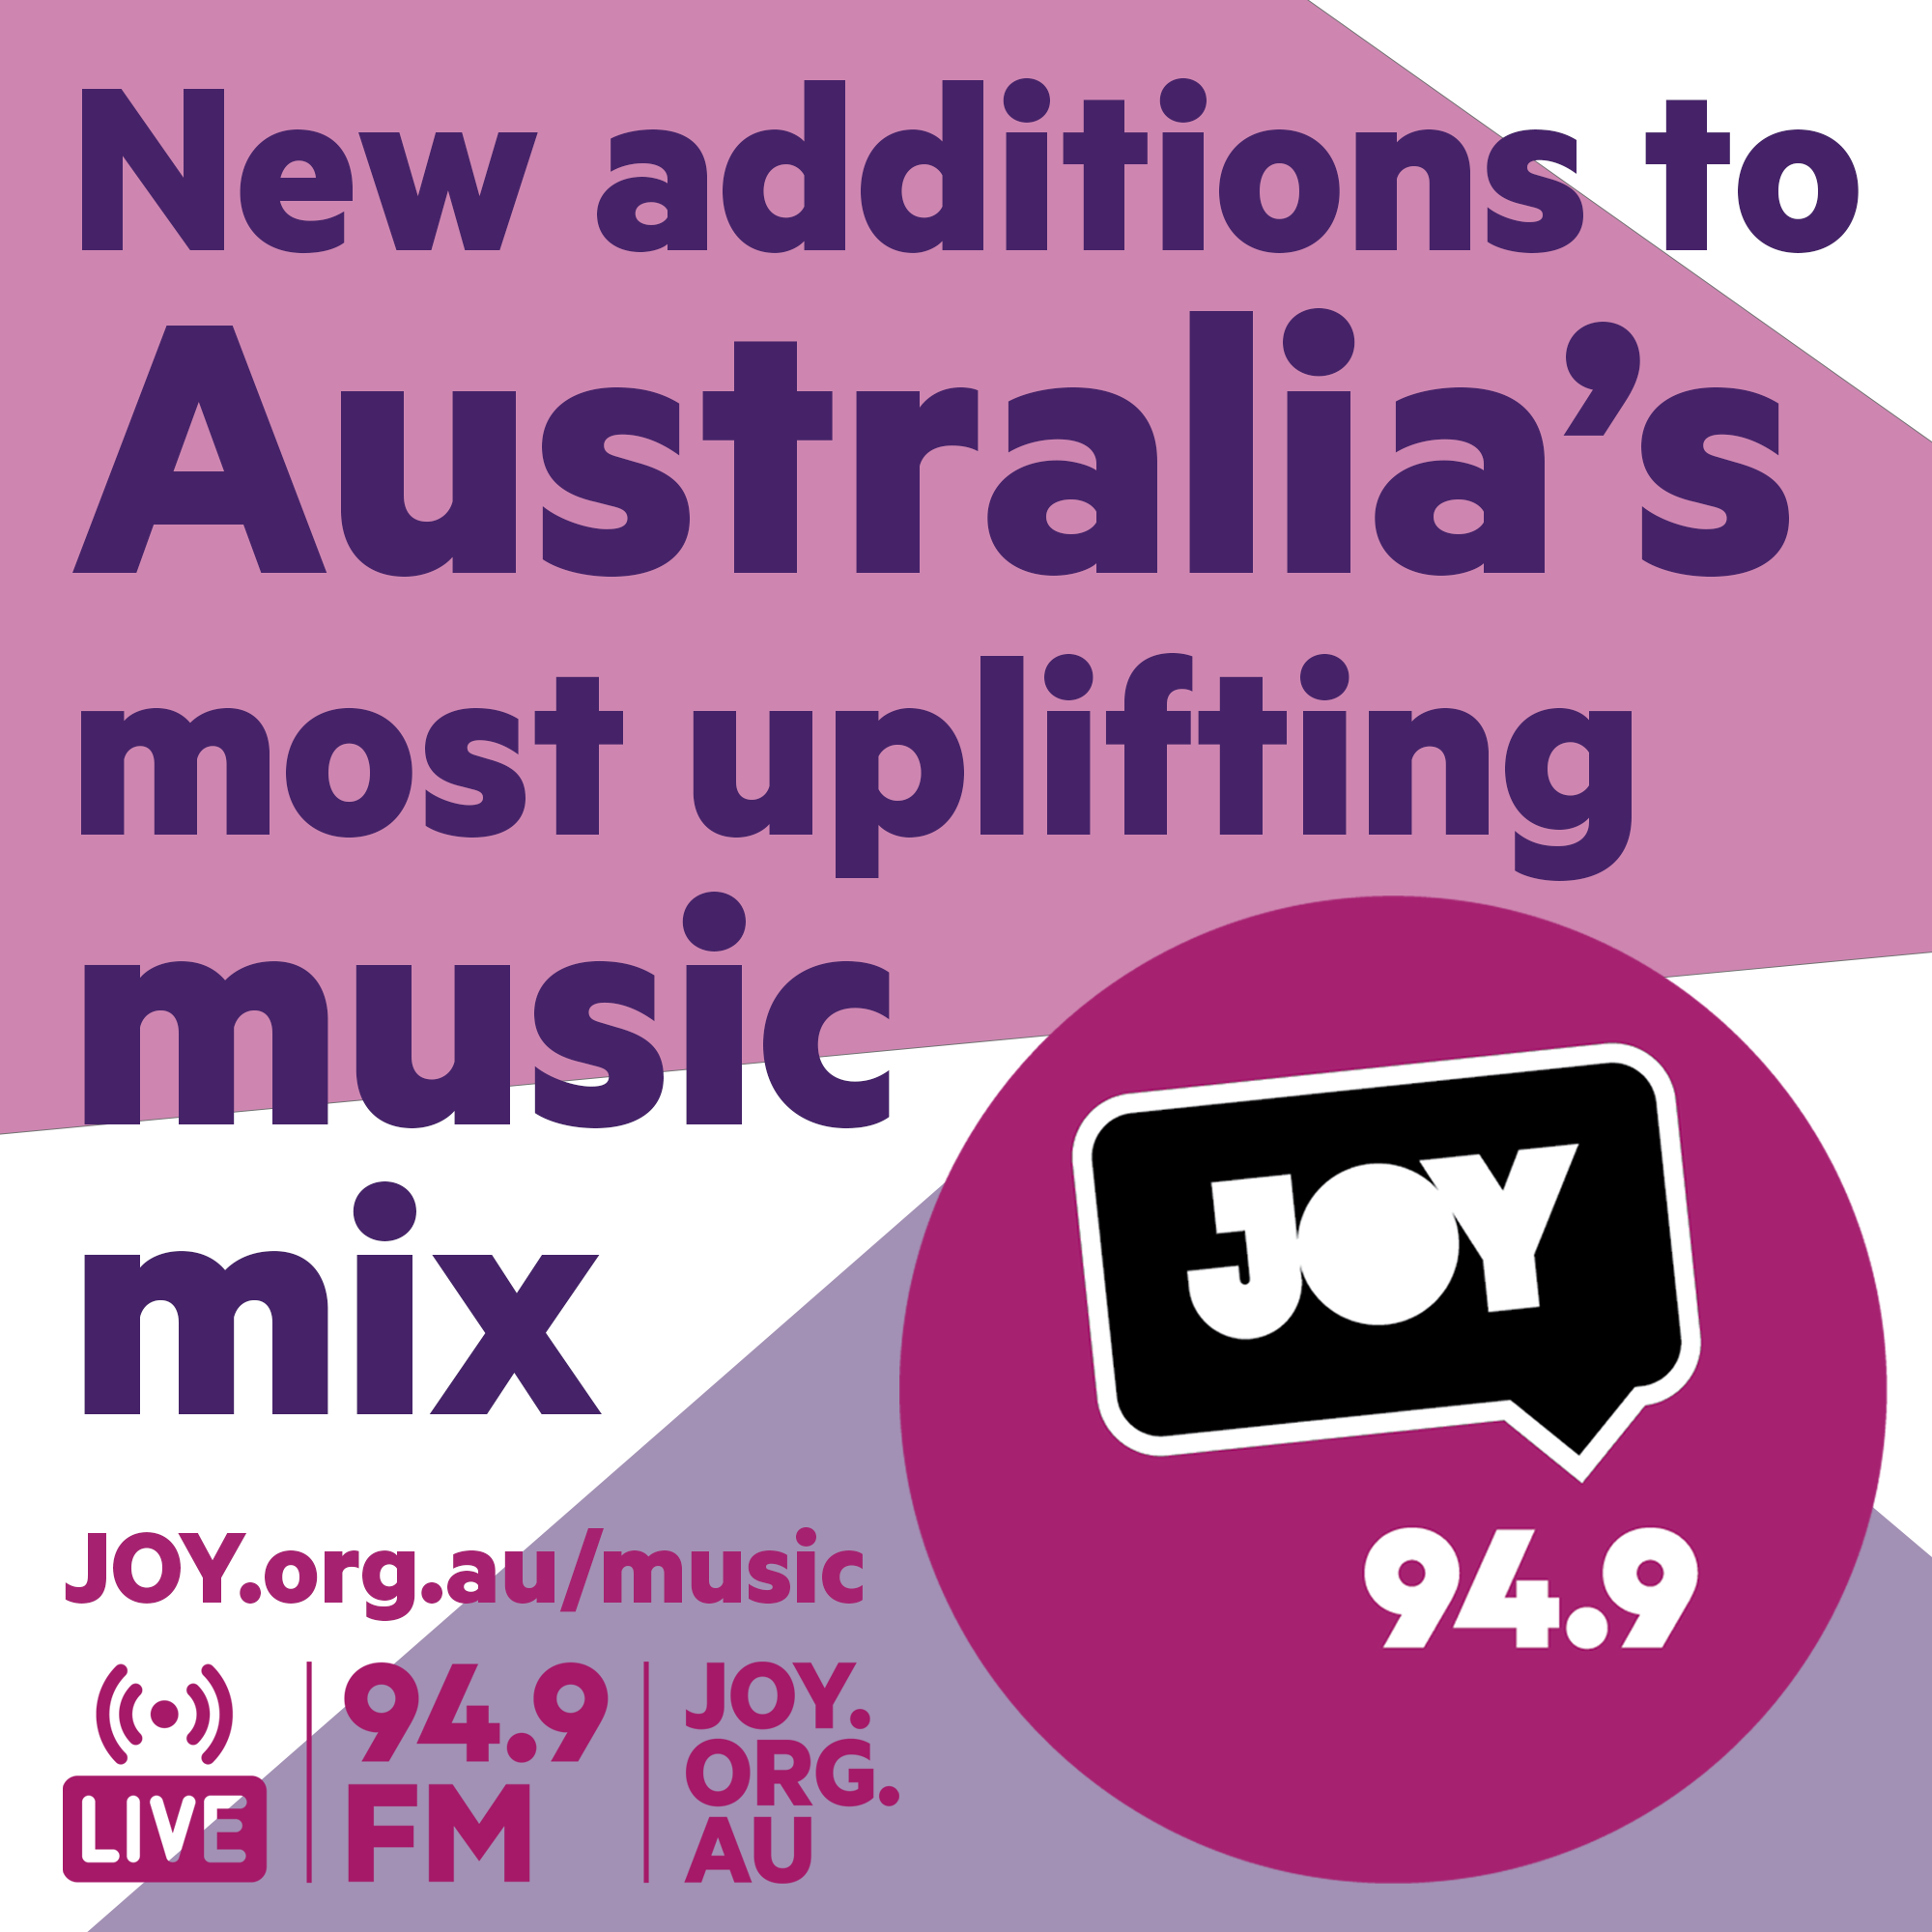 The newest songs to Australia’s most uplifting music mix: 29 June 2022